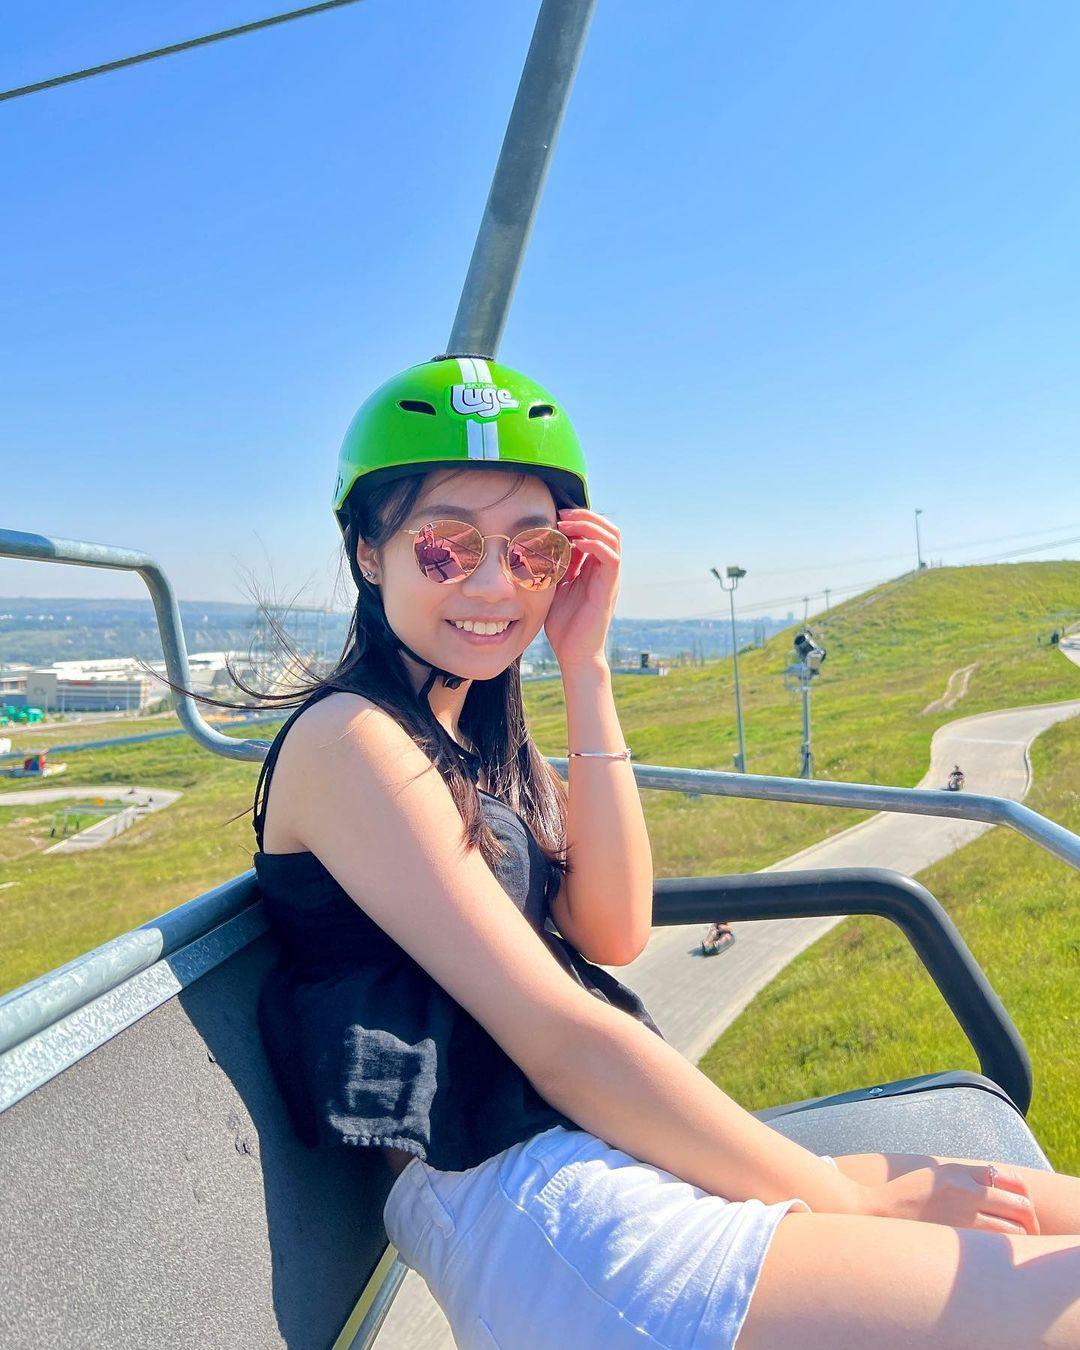 A woman poses for a photo on the Downhill Karting Calgary chairlift.